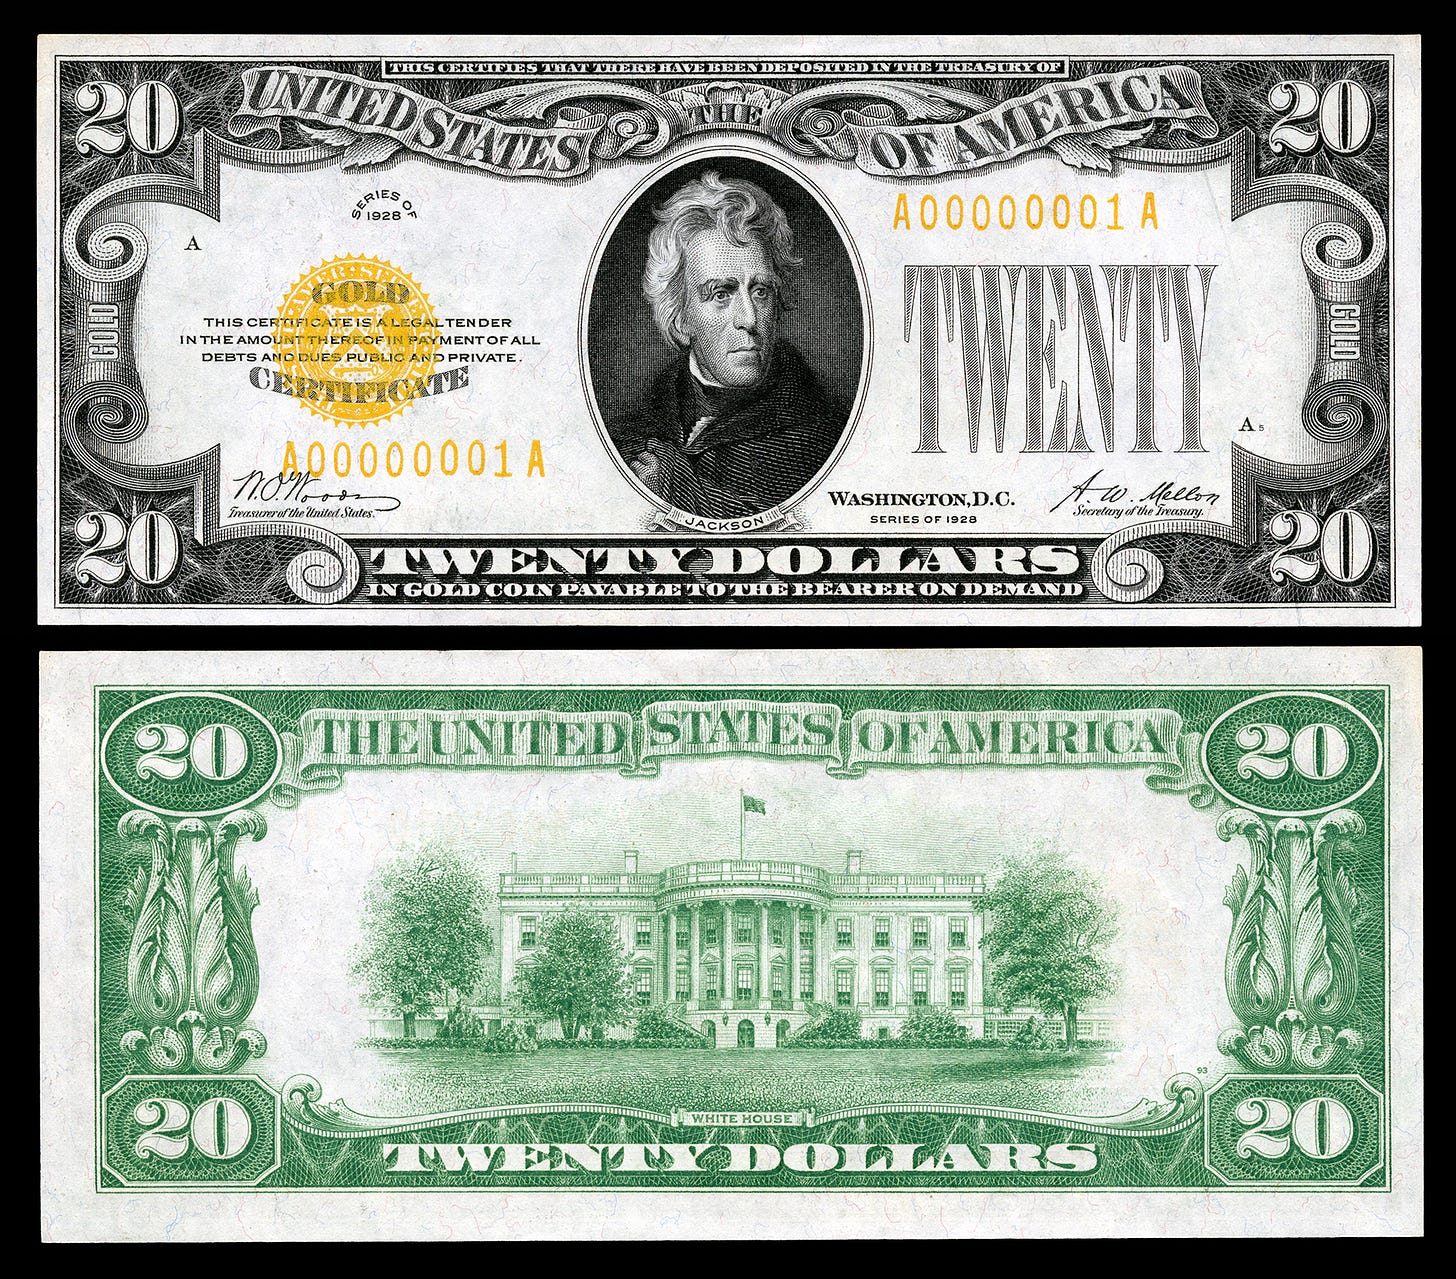 $20 Gold Certificate, Series 1928, Fr.2402, depicting Andrew Jackson